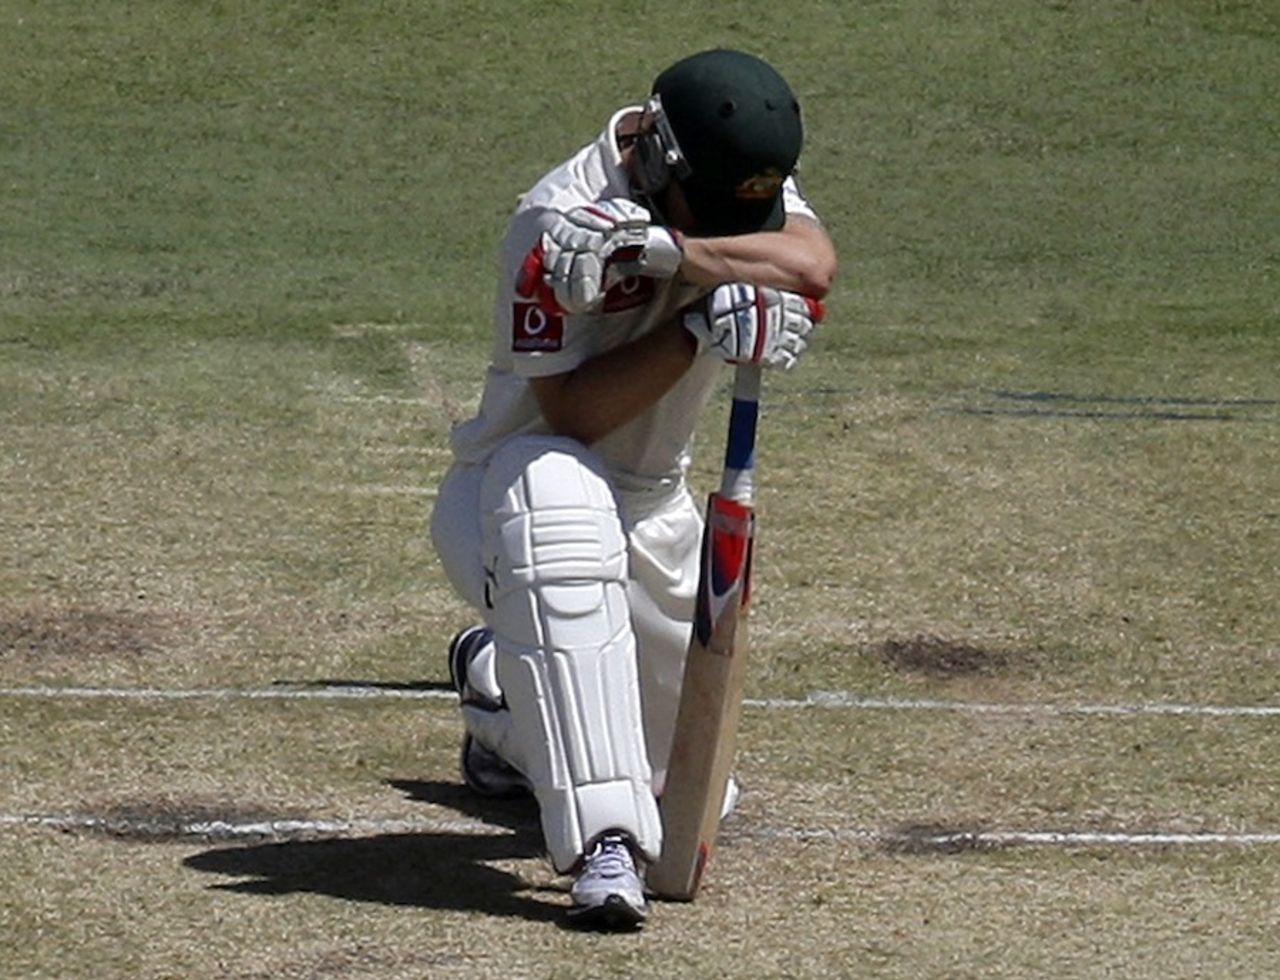 Matthew Wade kneels over his bat after he was bowled, Australia v South Africa, 3rd Test, 2nd day, Perth, December 1, 2012